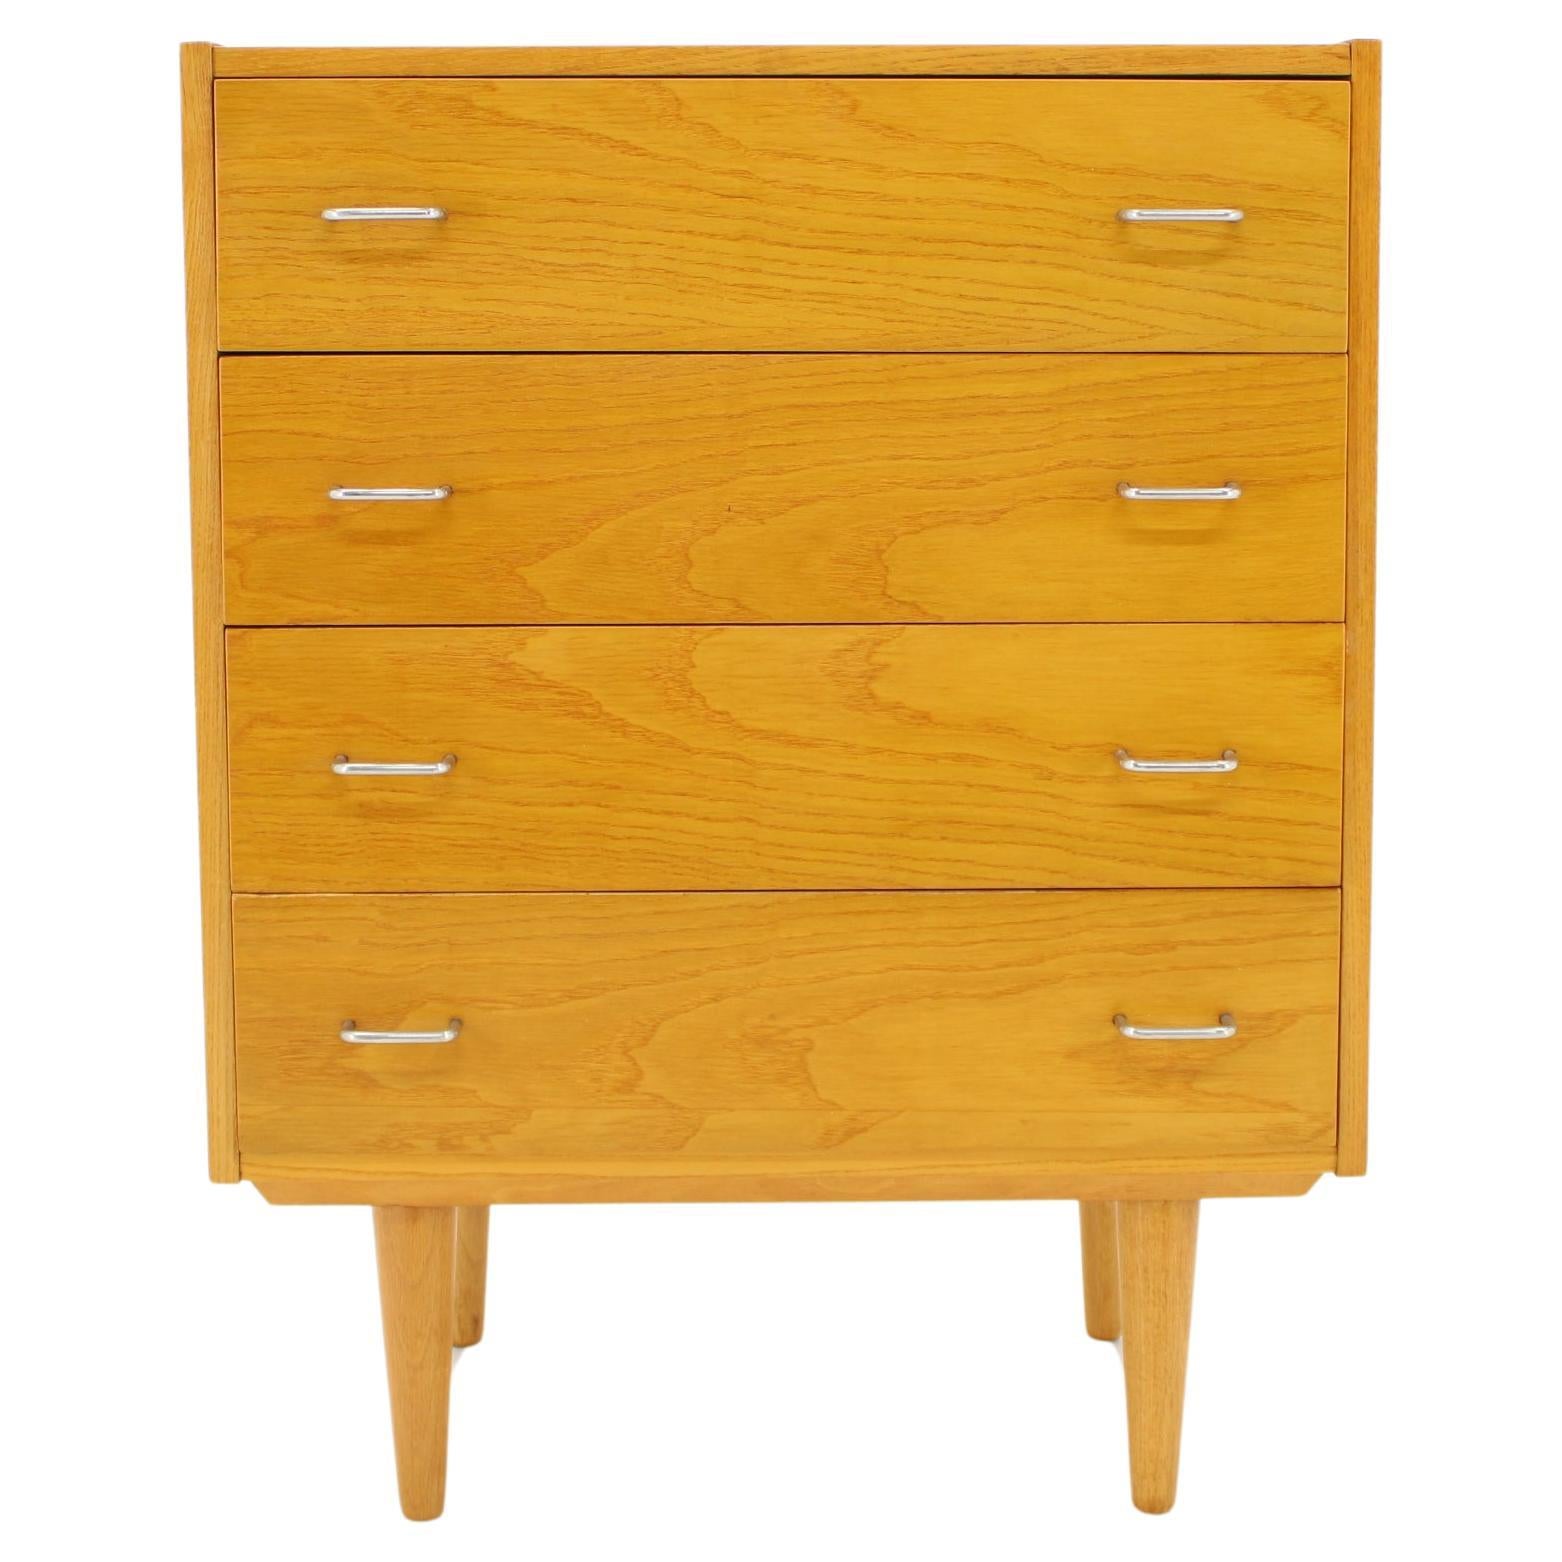 1960s Chest of Drawers in Maple Finish, Czechoslovakia For Sale